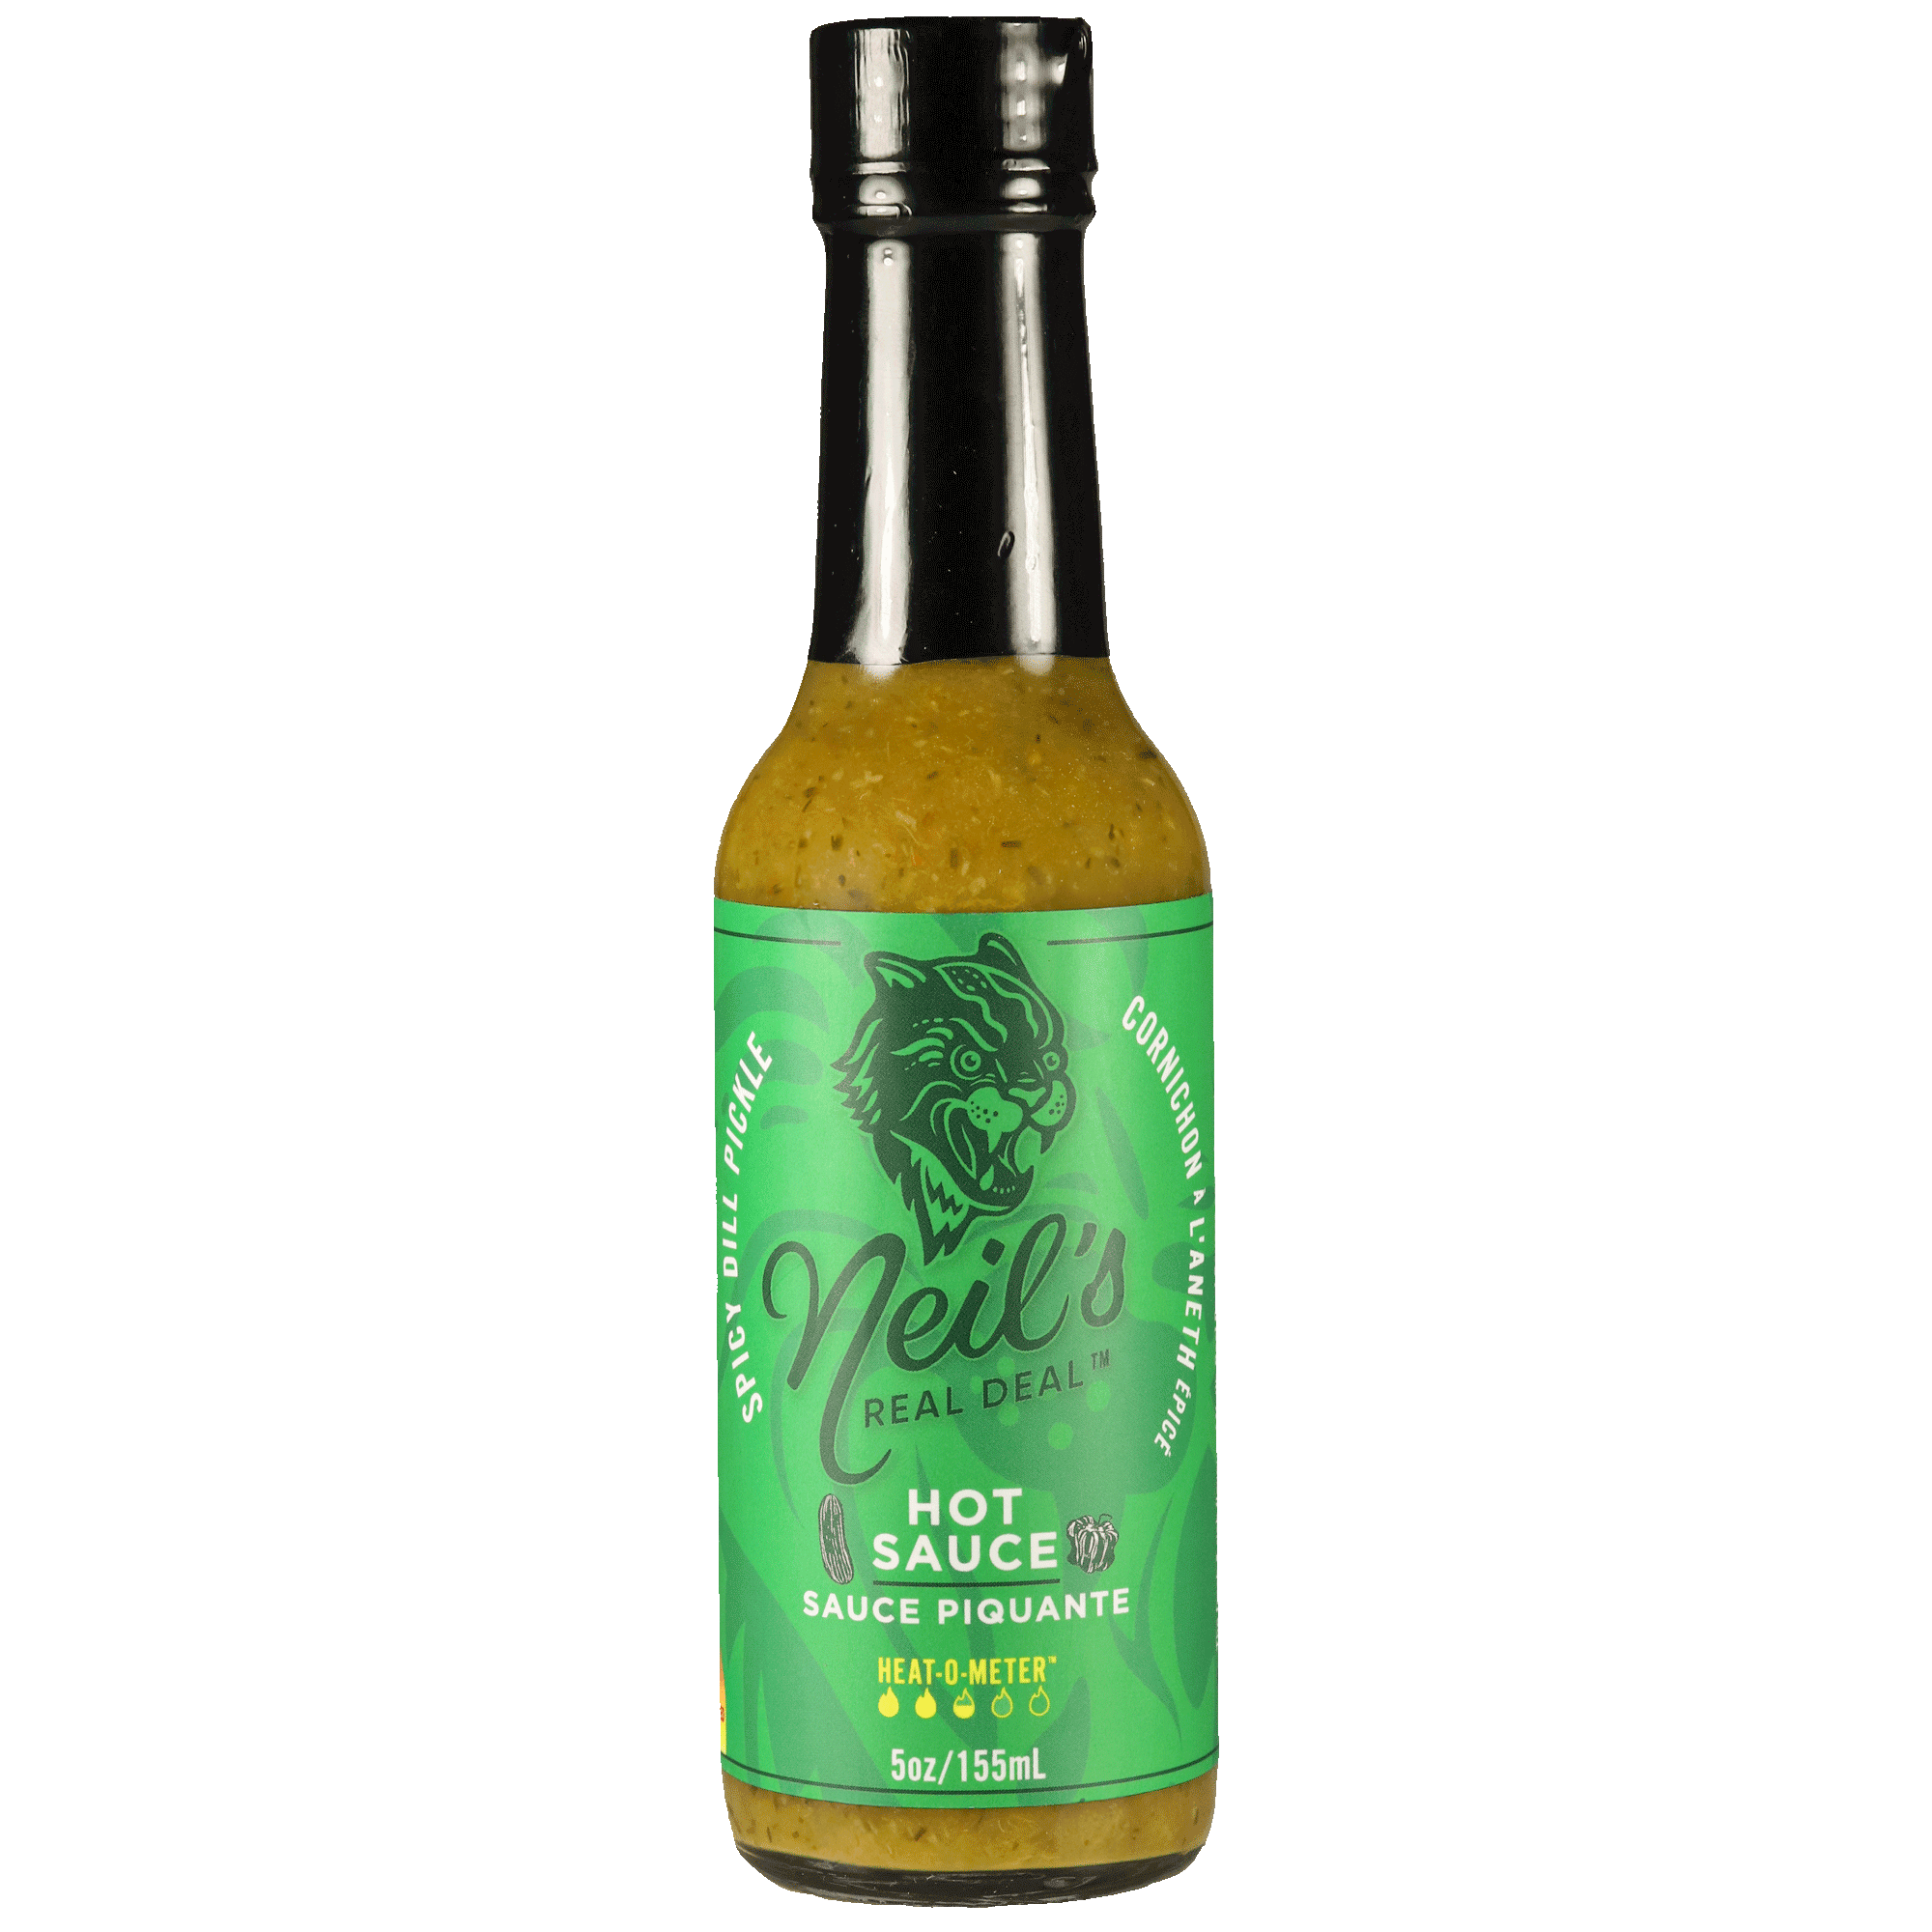 Spicy Dill Pickle Hot Sauce - Neil's Real Deal